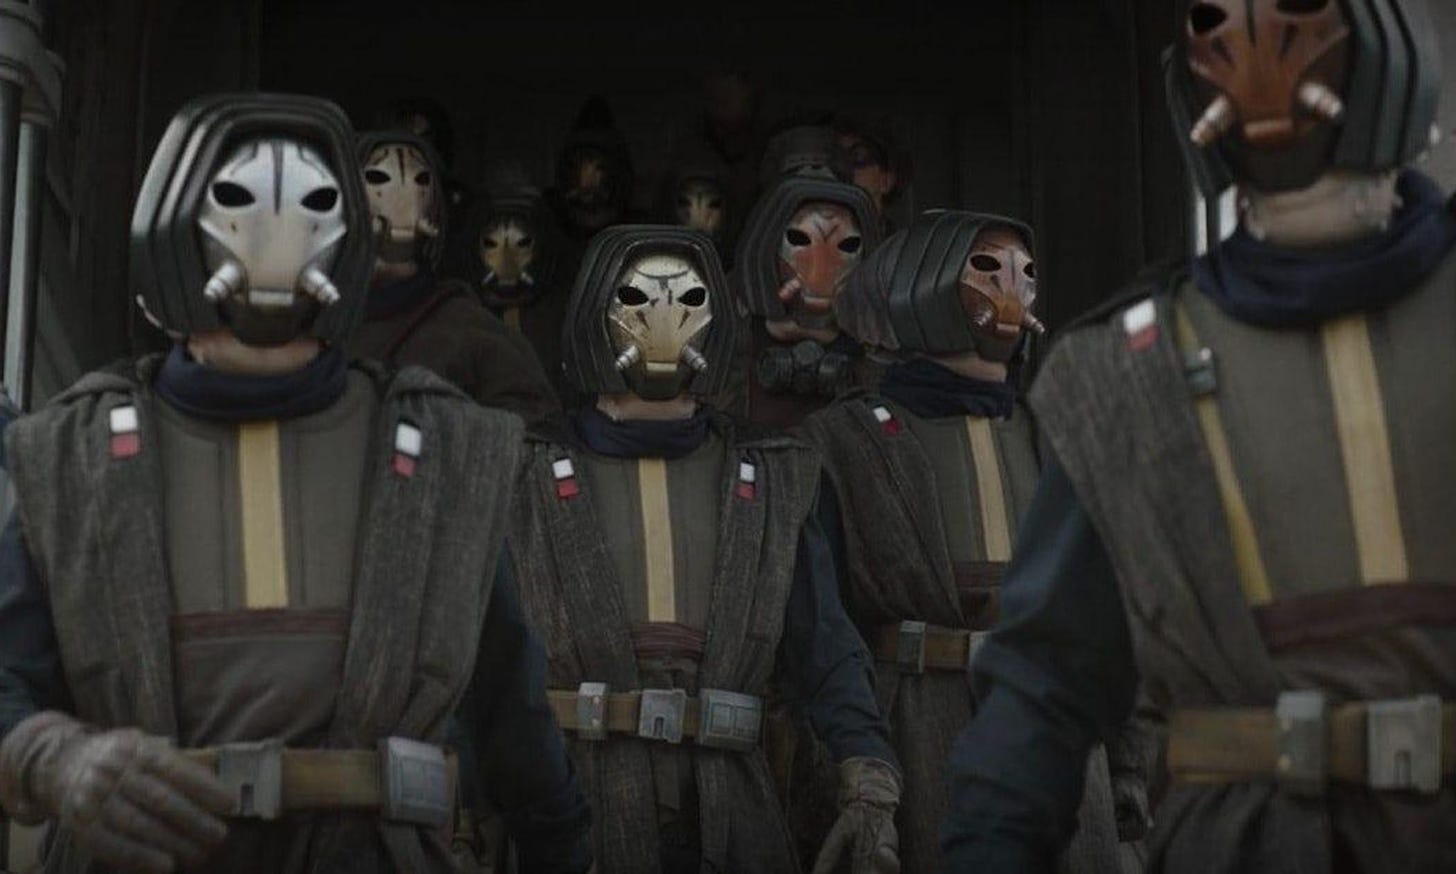 Things Star Wars Fans Didn't Know About The Pyke Syndicate